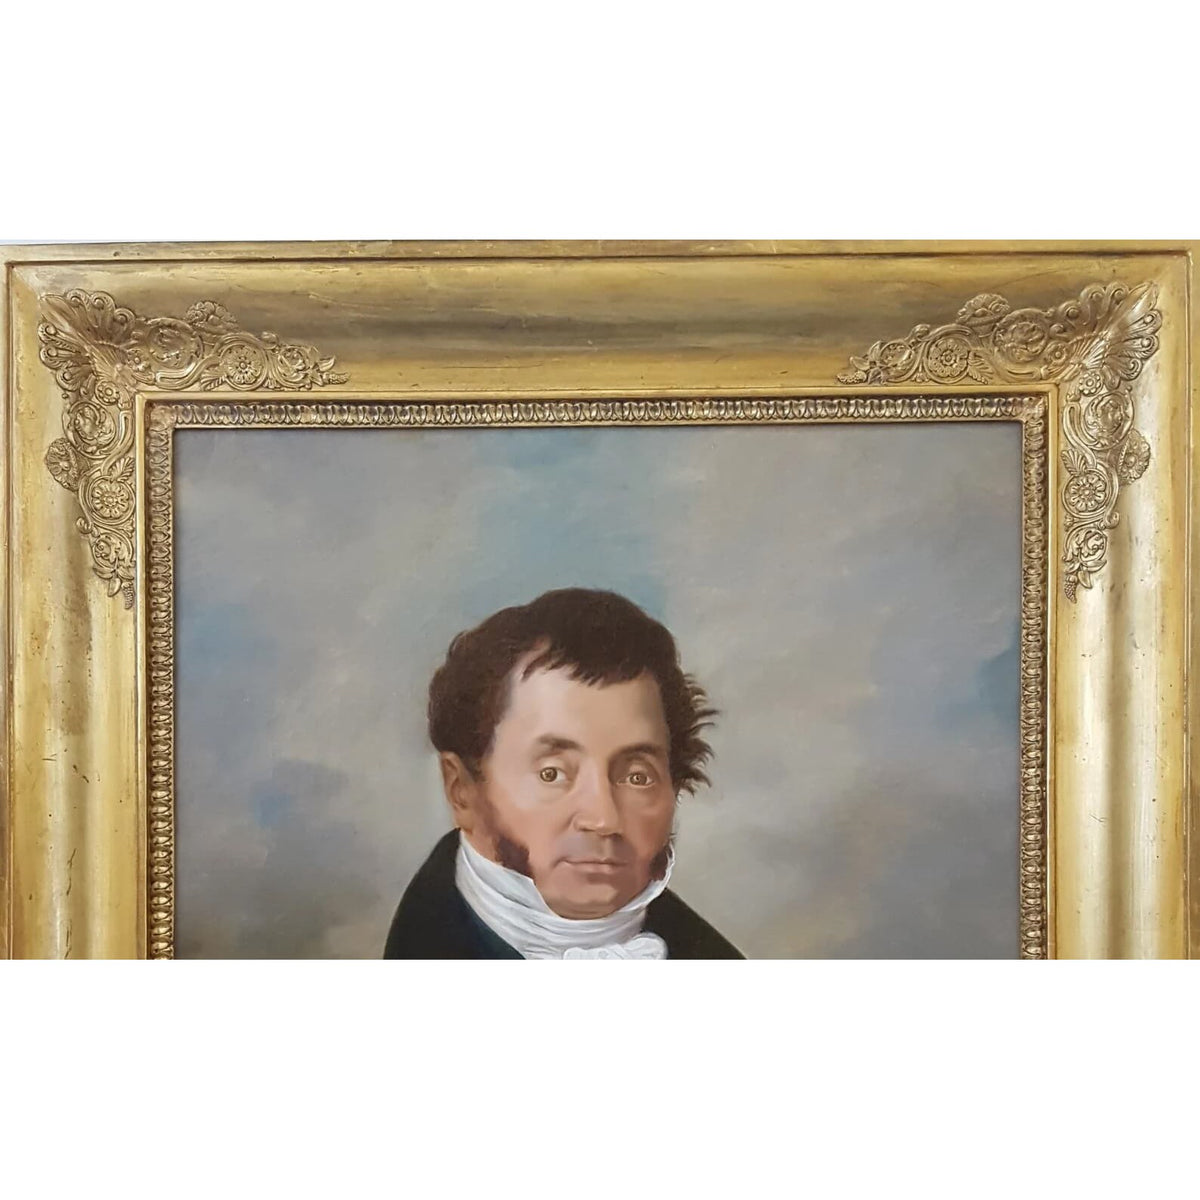 Antique portrait oil painting merchant with an elegant suit 19th century French school for sale at Winckelmann Gallery